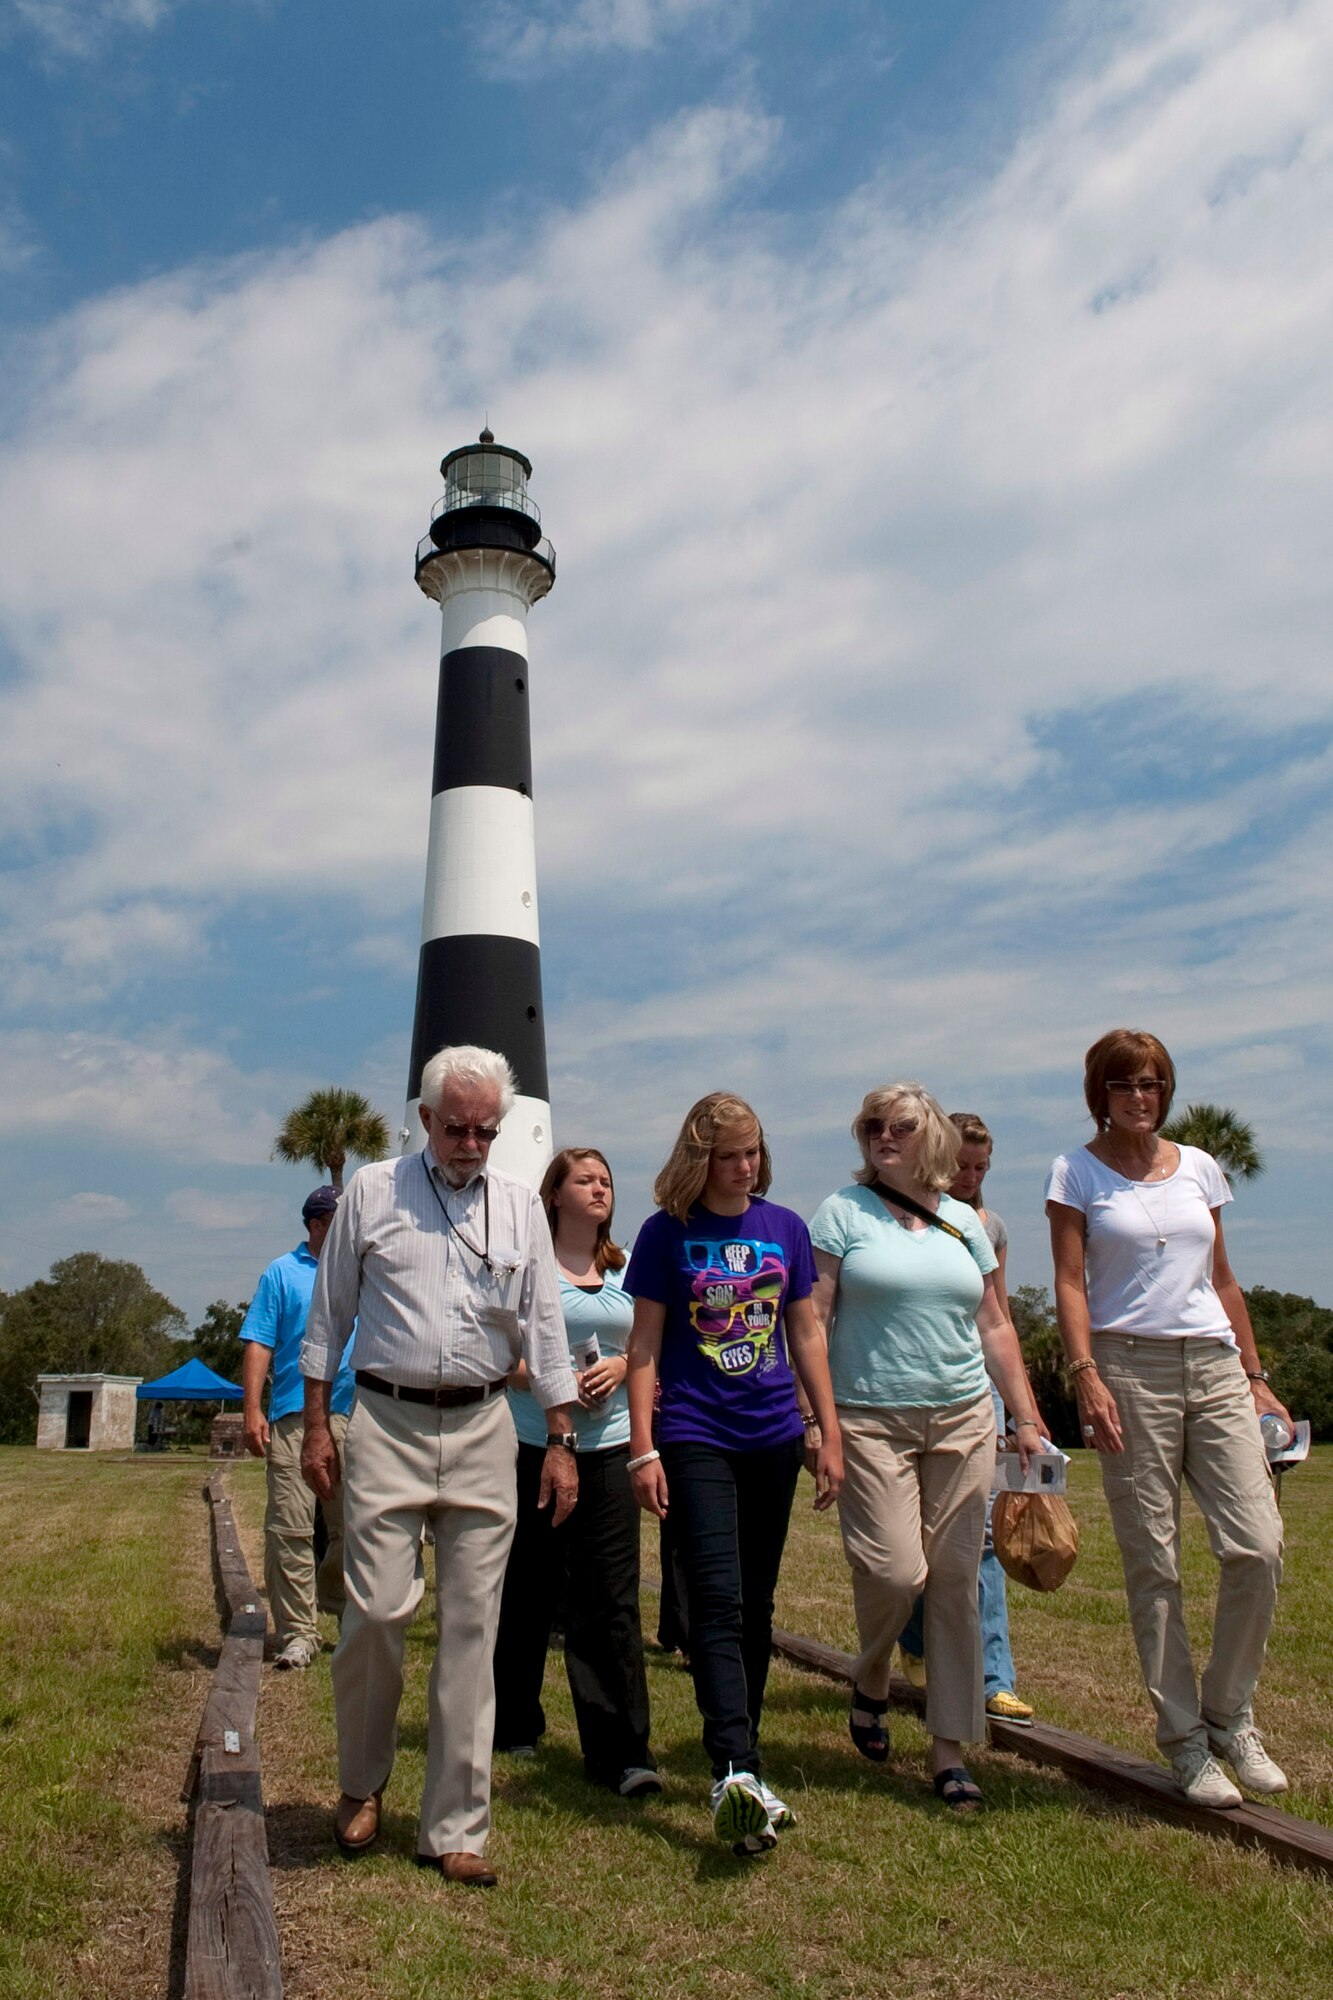 Sonny Witt, Detachment 1, 45th Mission Support Group director of operations, at left, gives a tour of Cape Canaveral Air Force Station to a group of visitors, including Lisa Wilson, wife of 45th Space Wing Commander Brig. Gen. Ed Wilson, at right, at the Cape Canaveral Lighthouse, one of several stops on the public tour of Cape Canaveral
AFS, offered Wednesdays and Thursdays. For tour details, call 321-494-5945 or email ccafstours@patrick.af.mil. (Air Force photo/Matthew Jurgens)